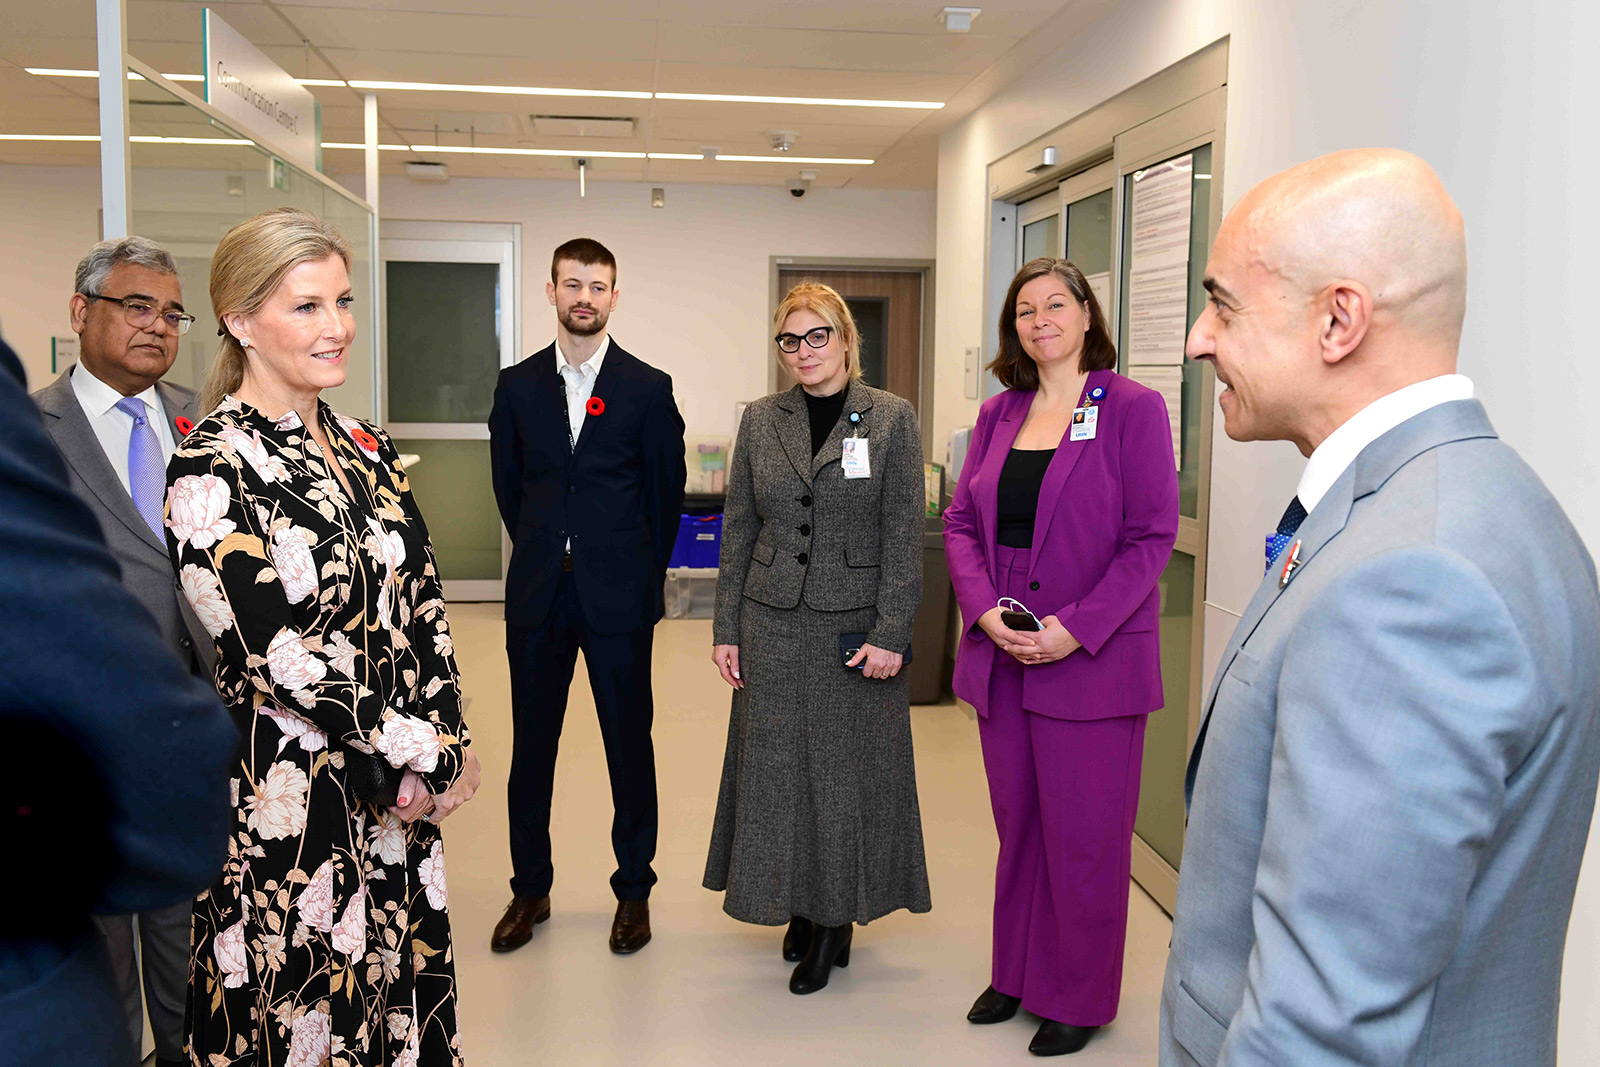 Her Royal Highness visited the Michael Lawrence Turk Emergency Rapid Assessment Centre, which since its inception in 2022 has served more than 37,000 patients, thus transforming patient experience in the emergency room.